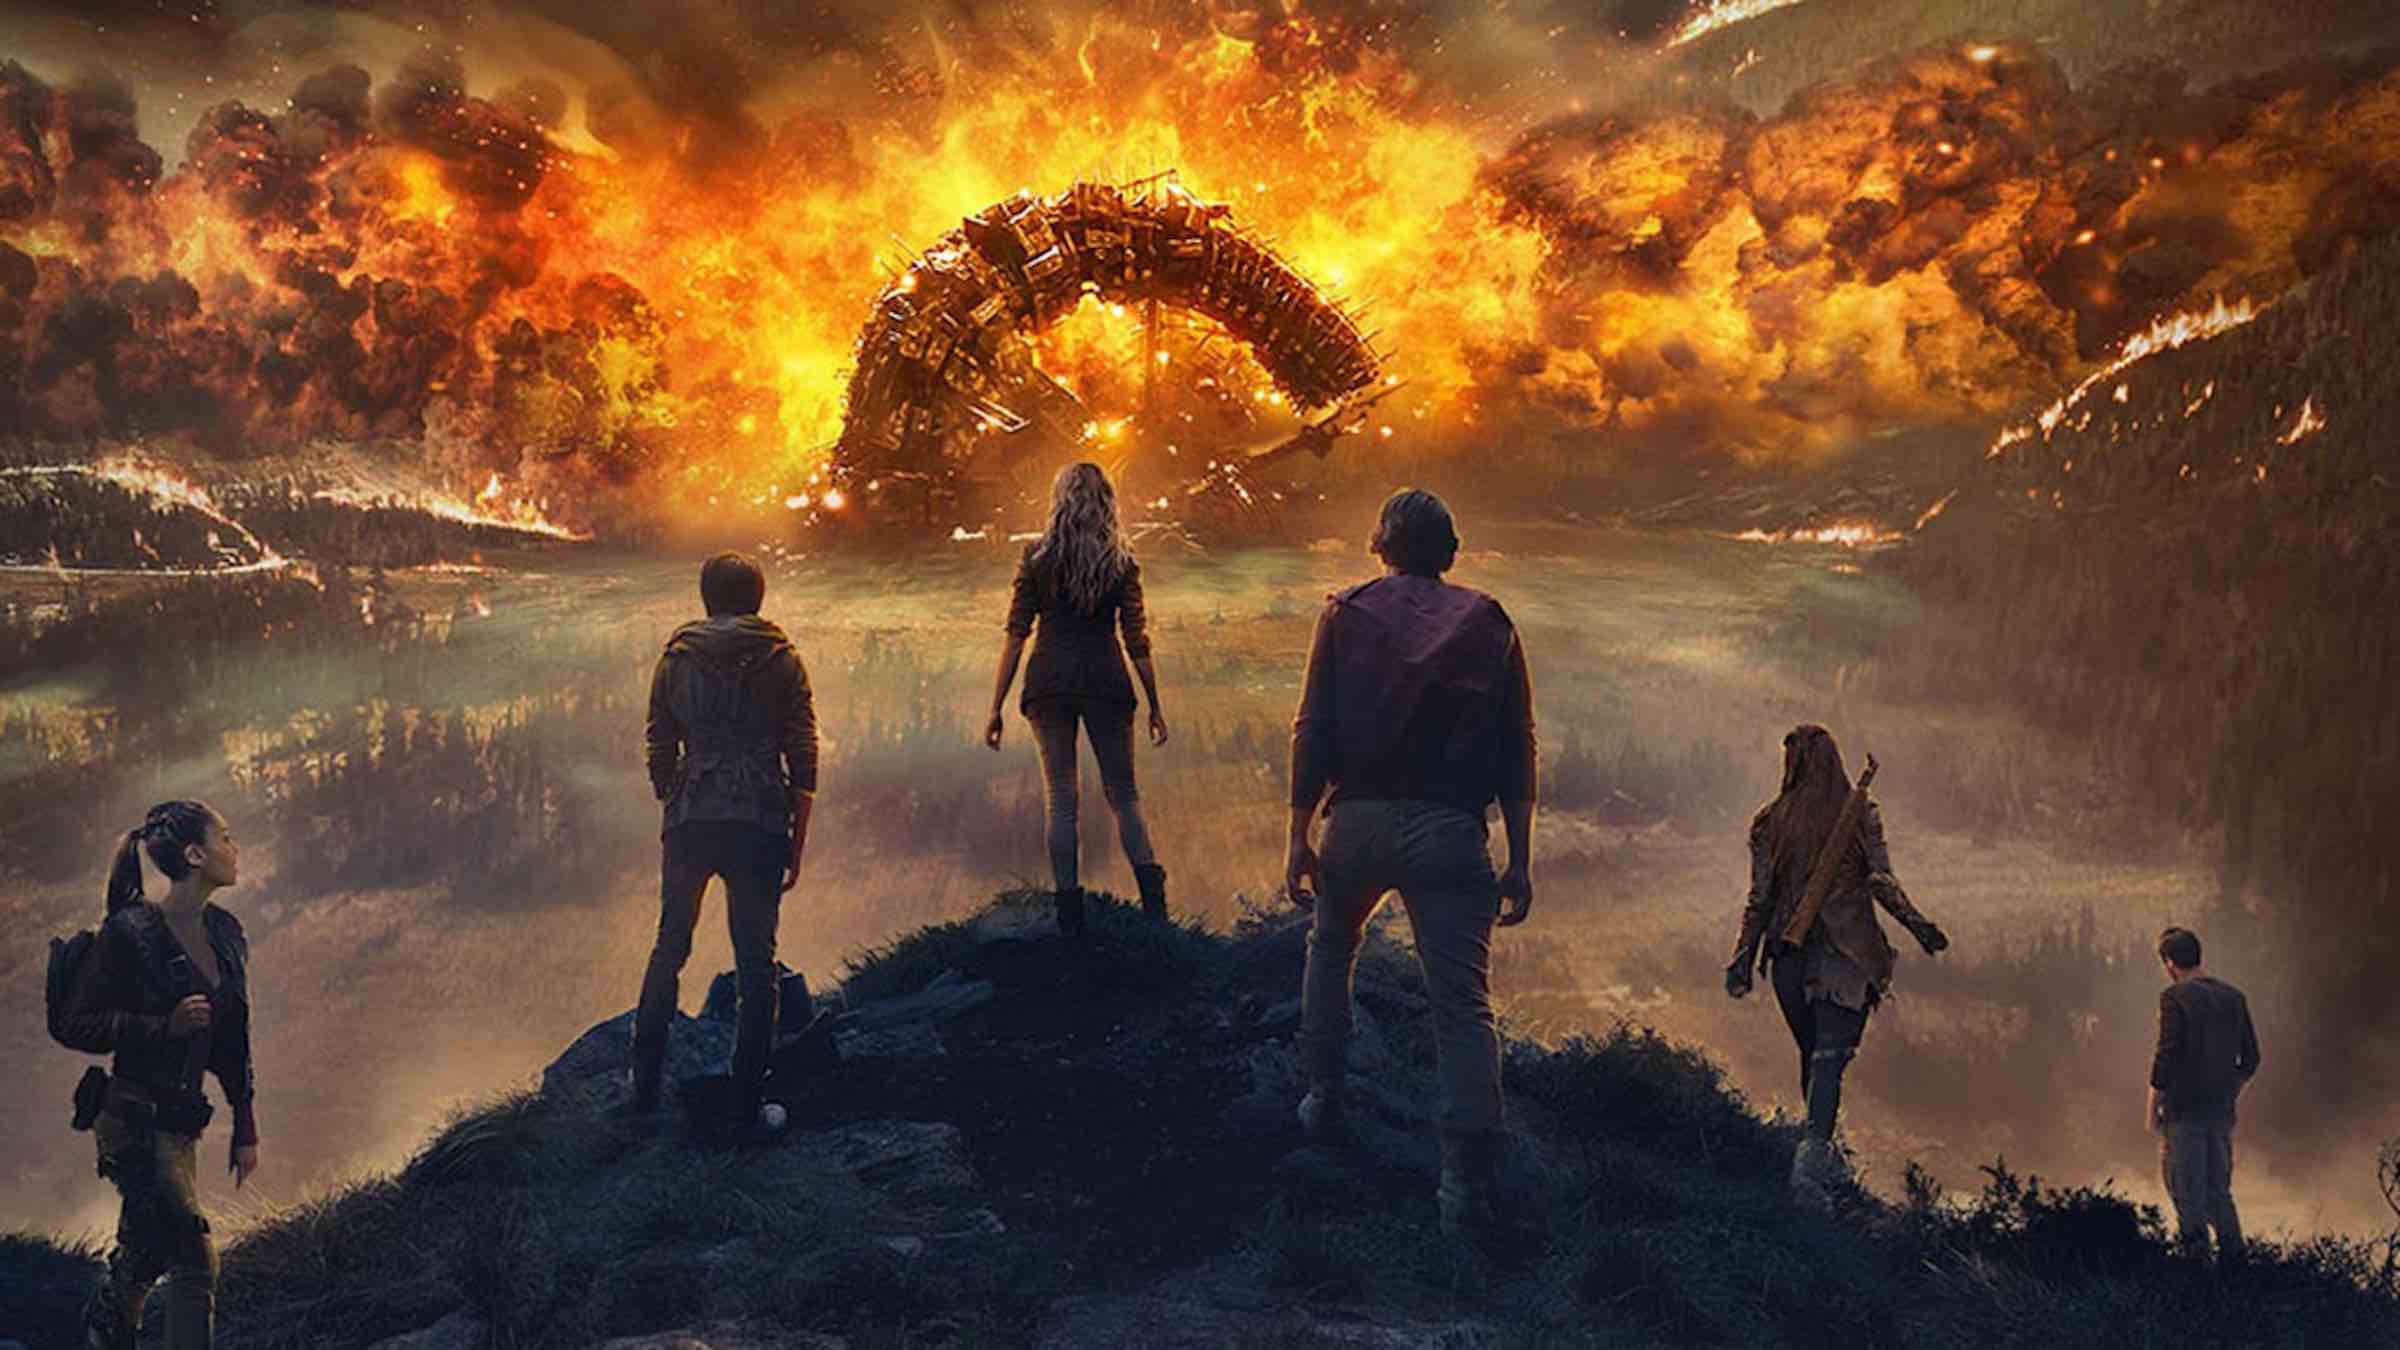 Even though 'The 100' is definitely ending next year, a prequel series is currently in development over at The CW. Here’s what fans need to know.